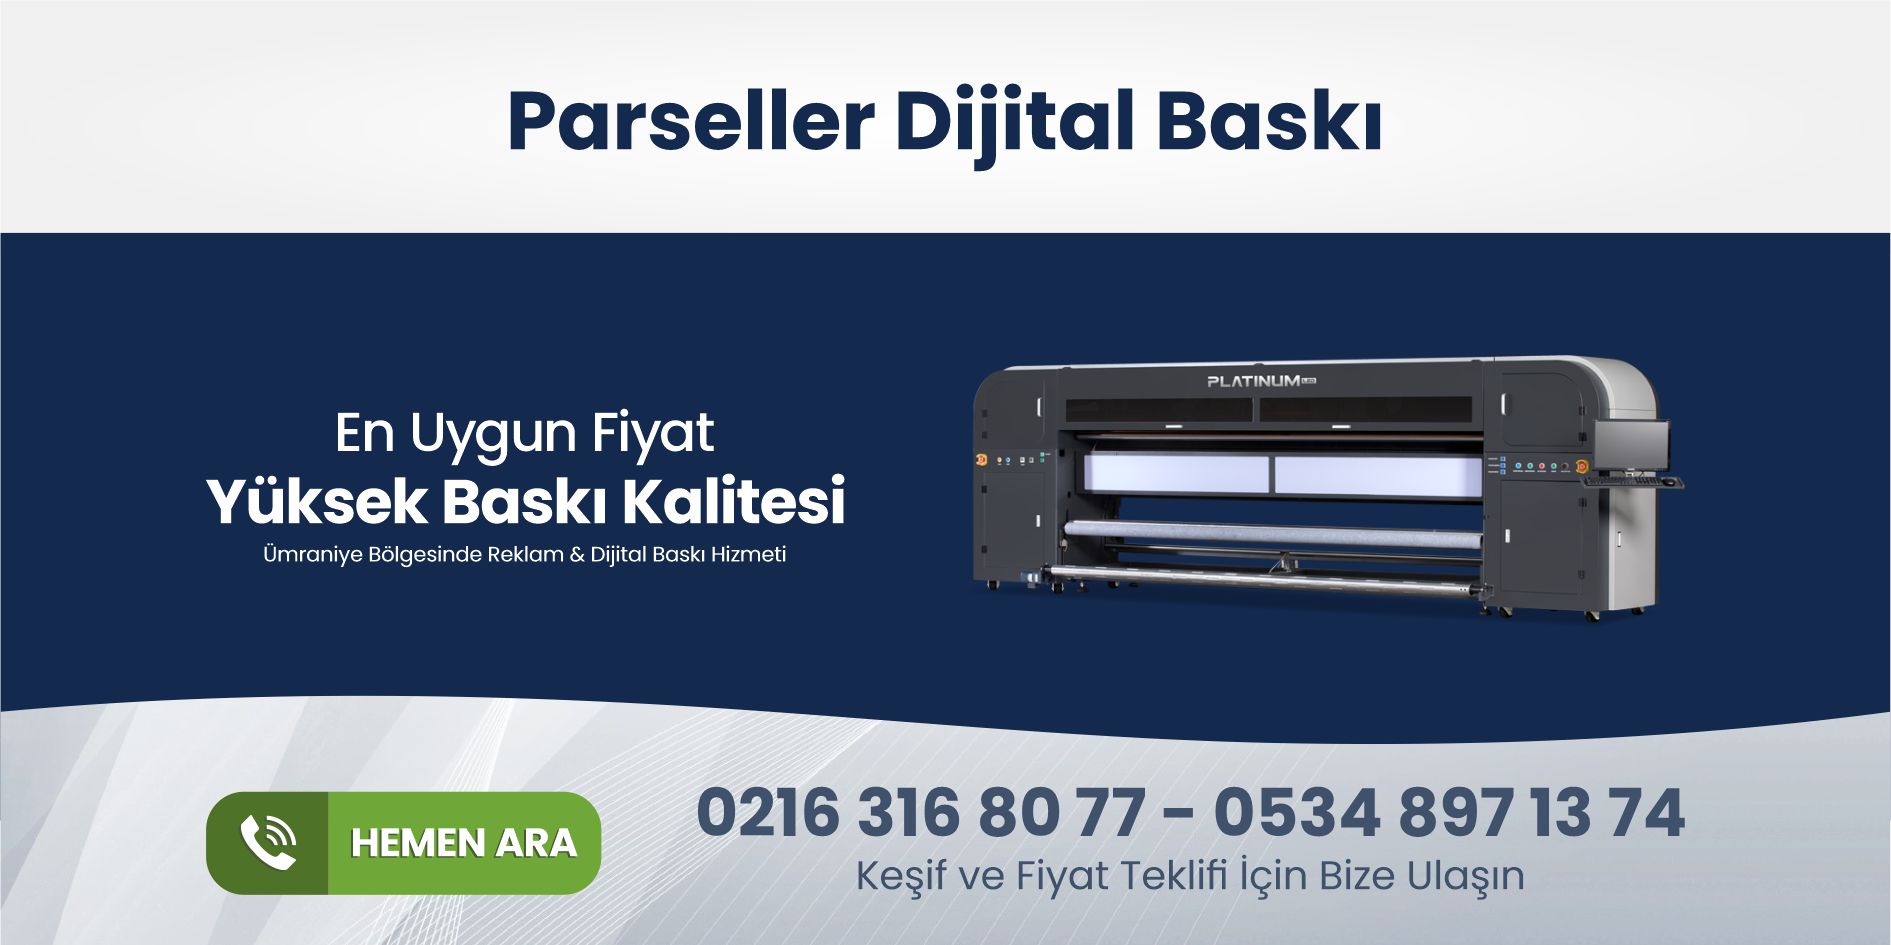 You are currently viewing Parseller Dijital Baskı